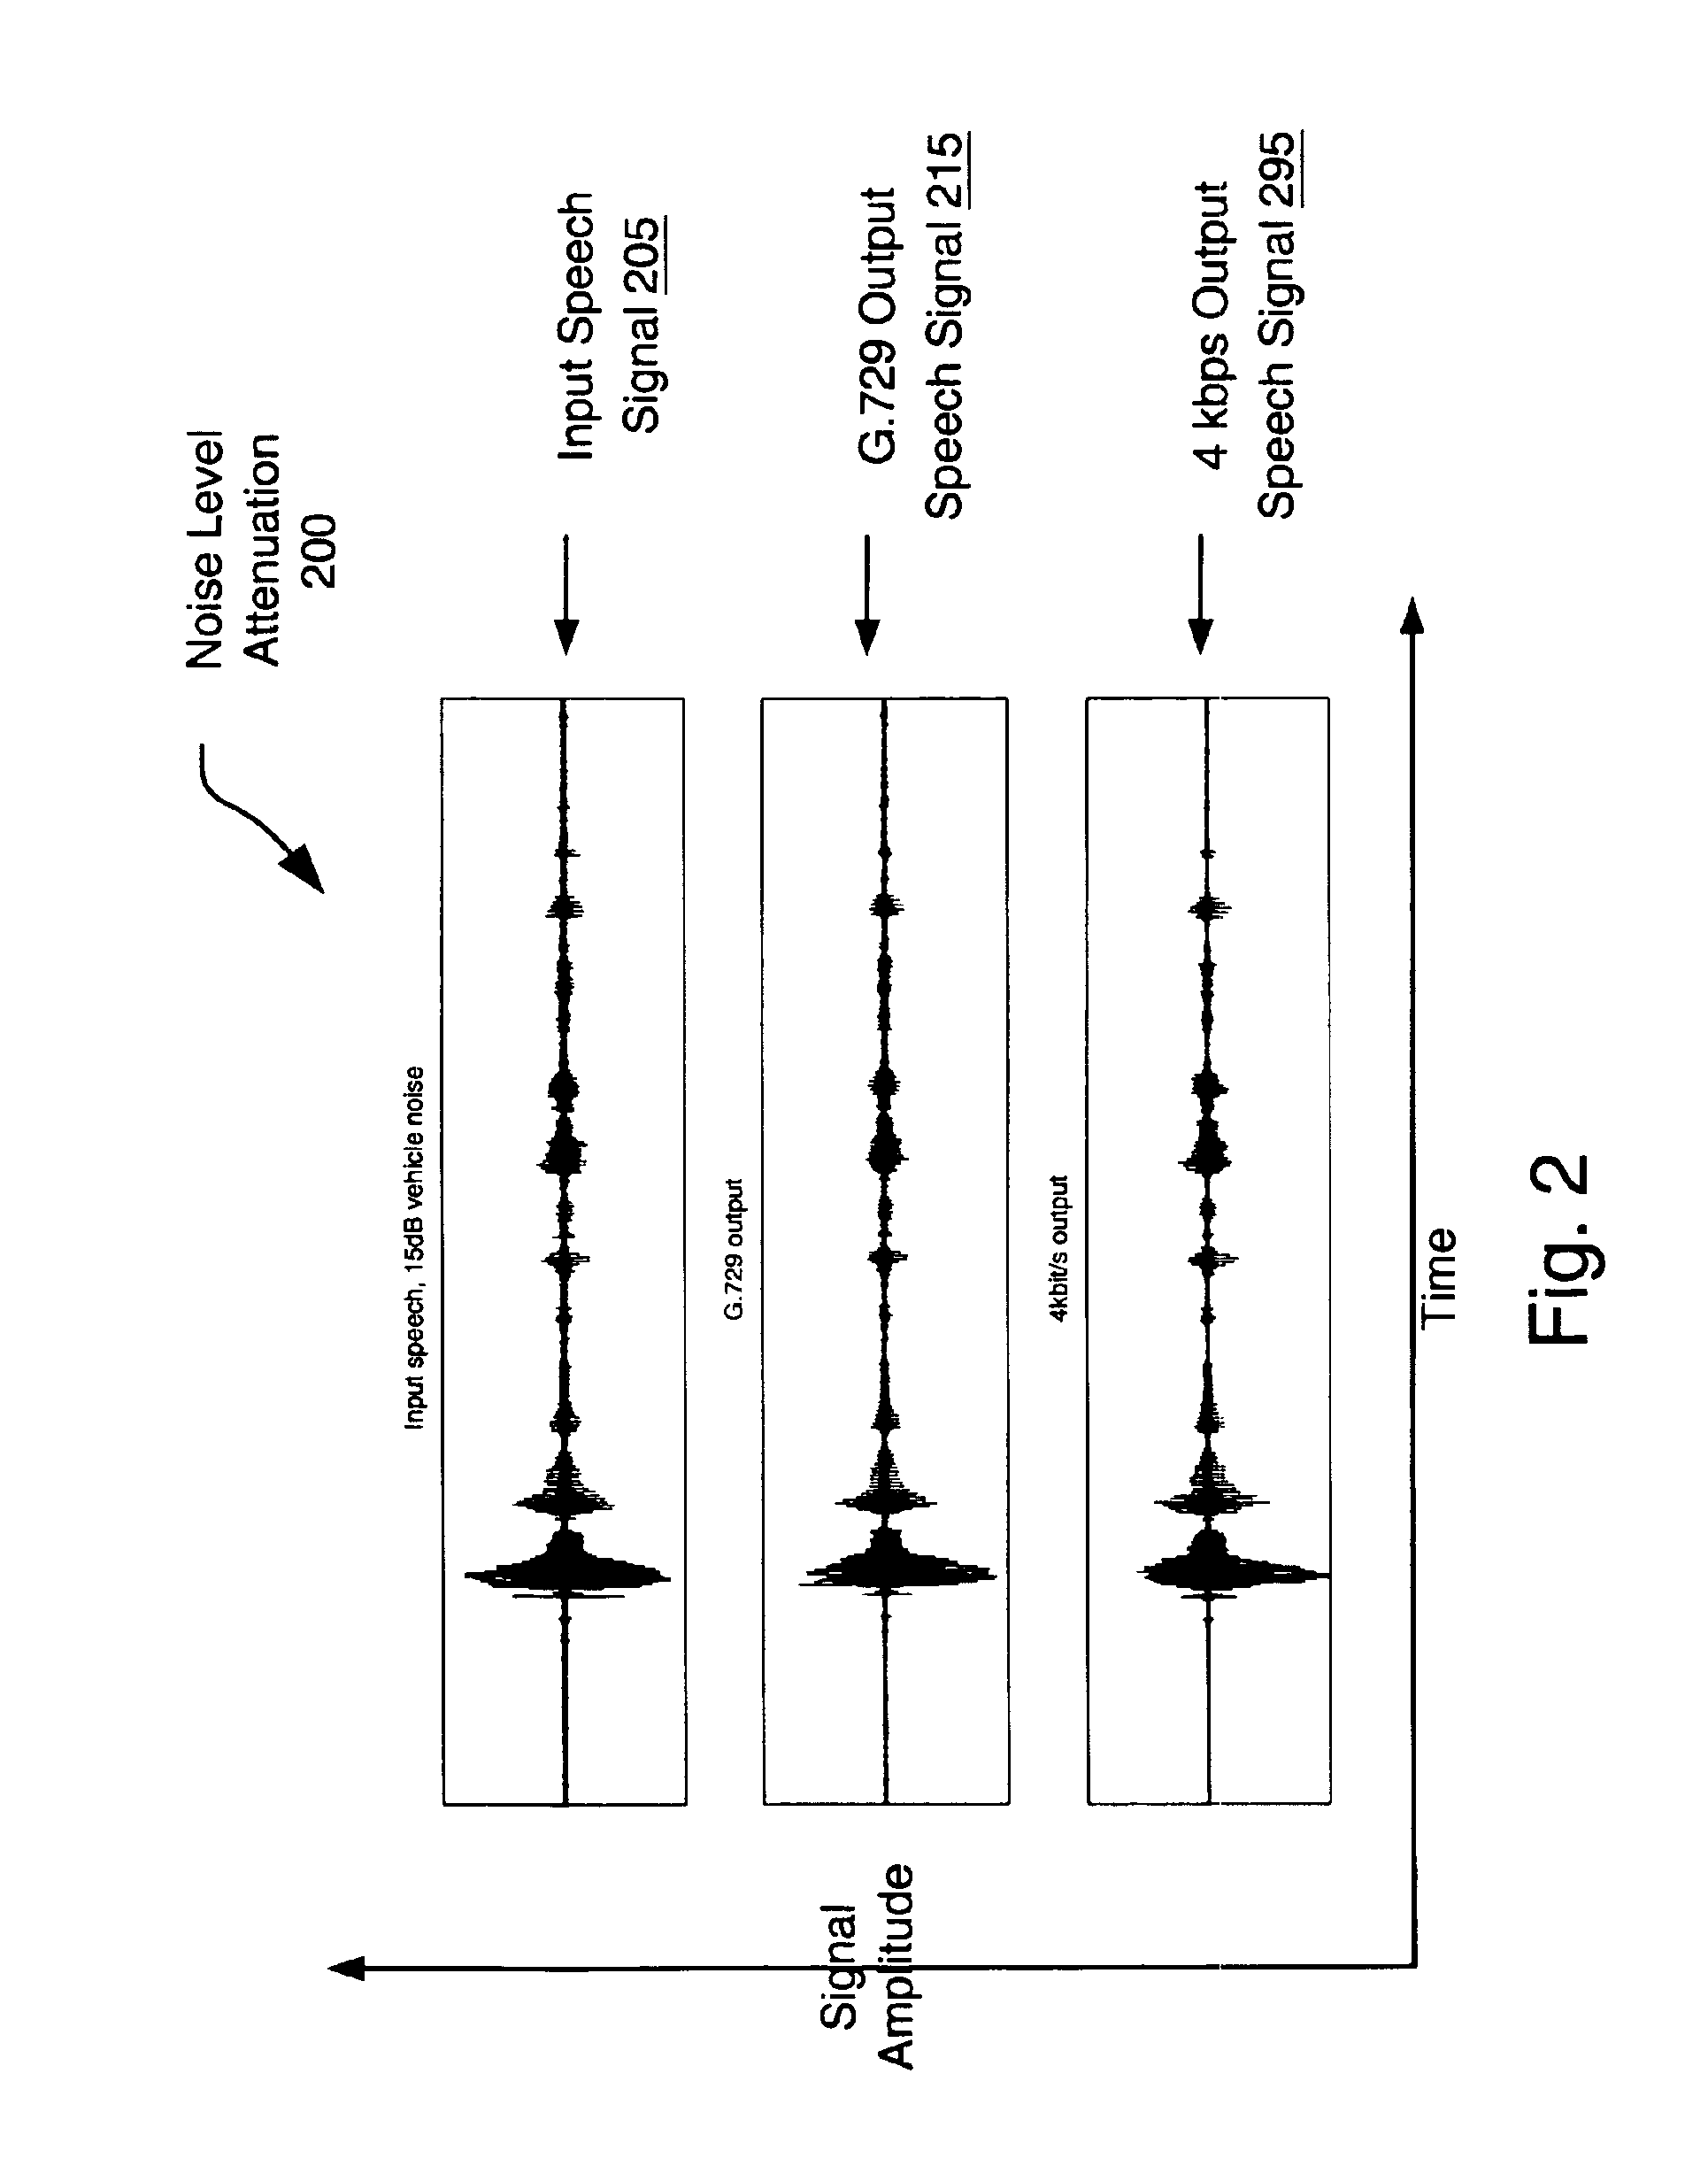 Fixed rate speech compression system and method